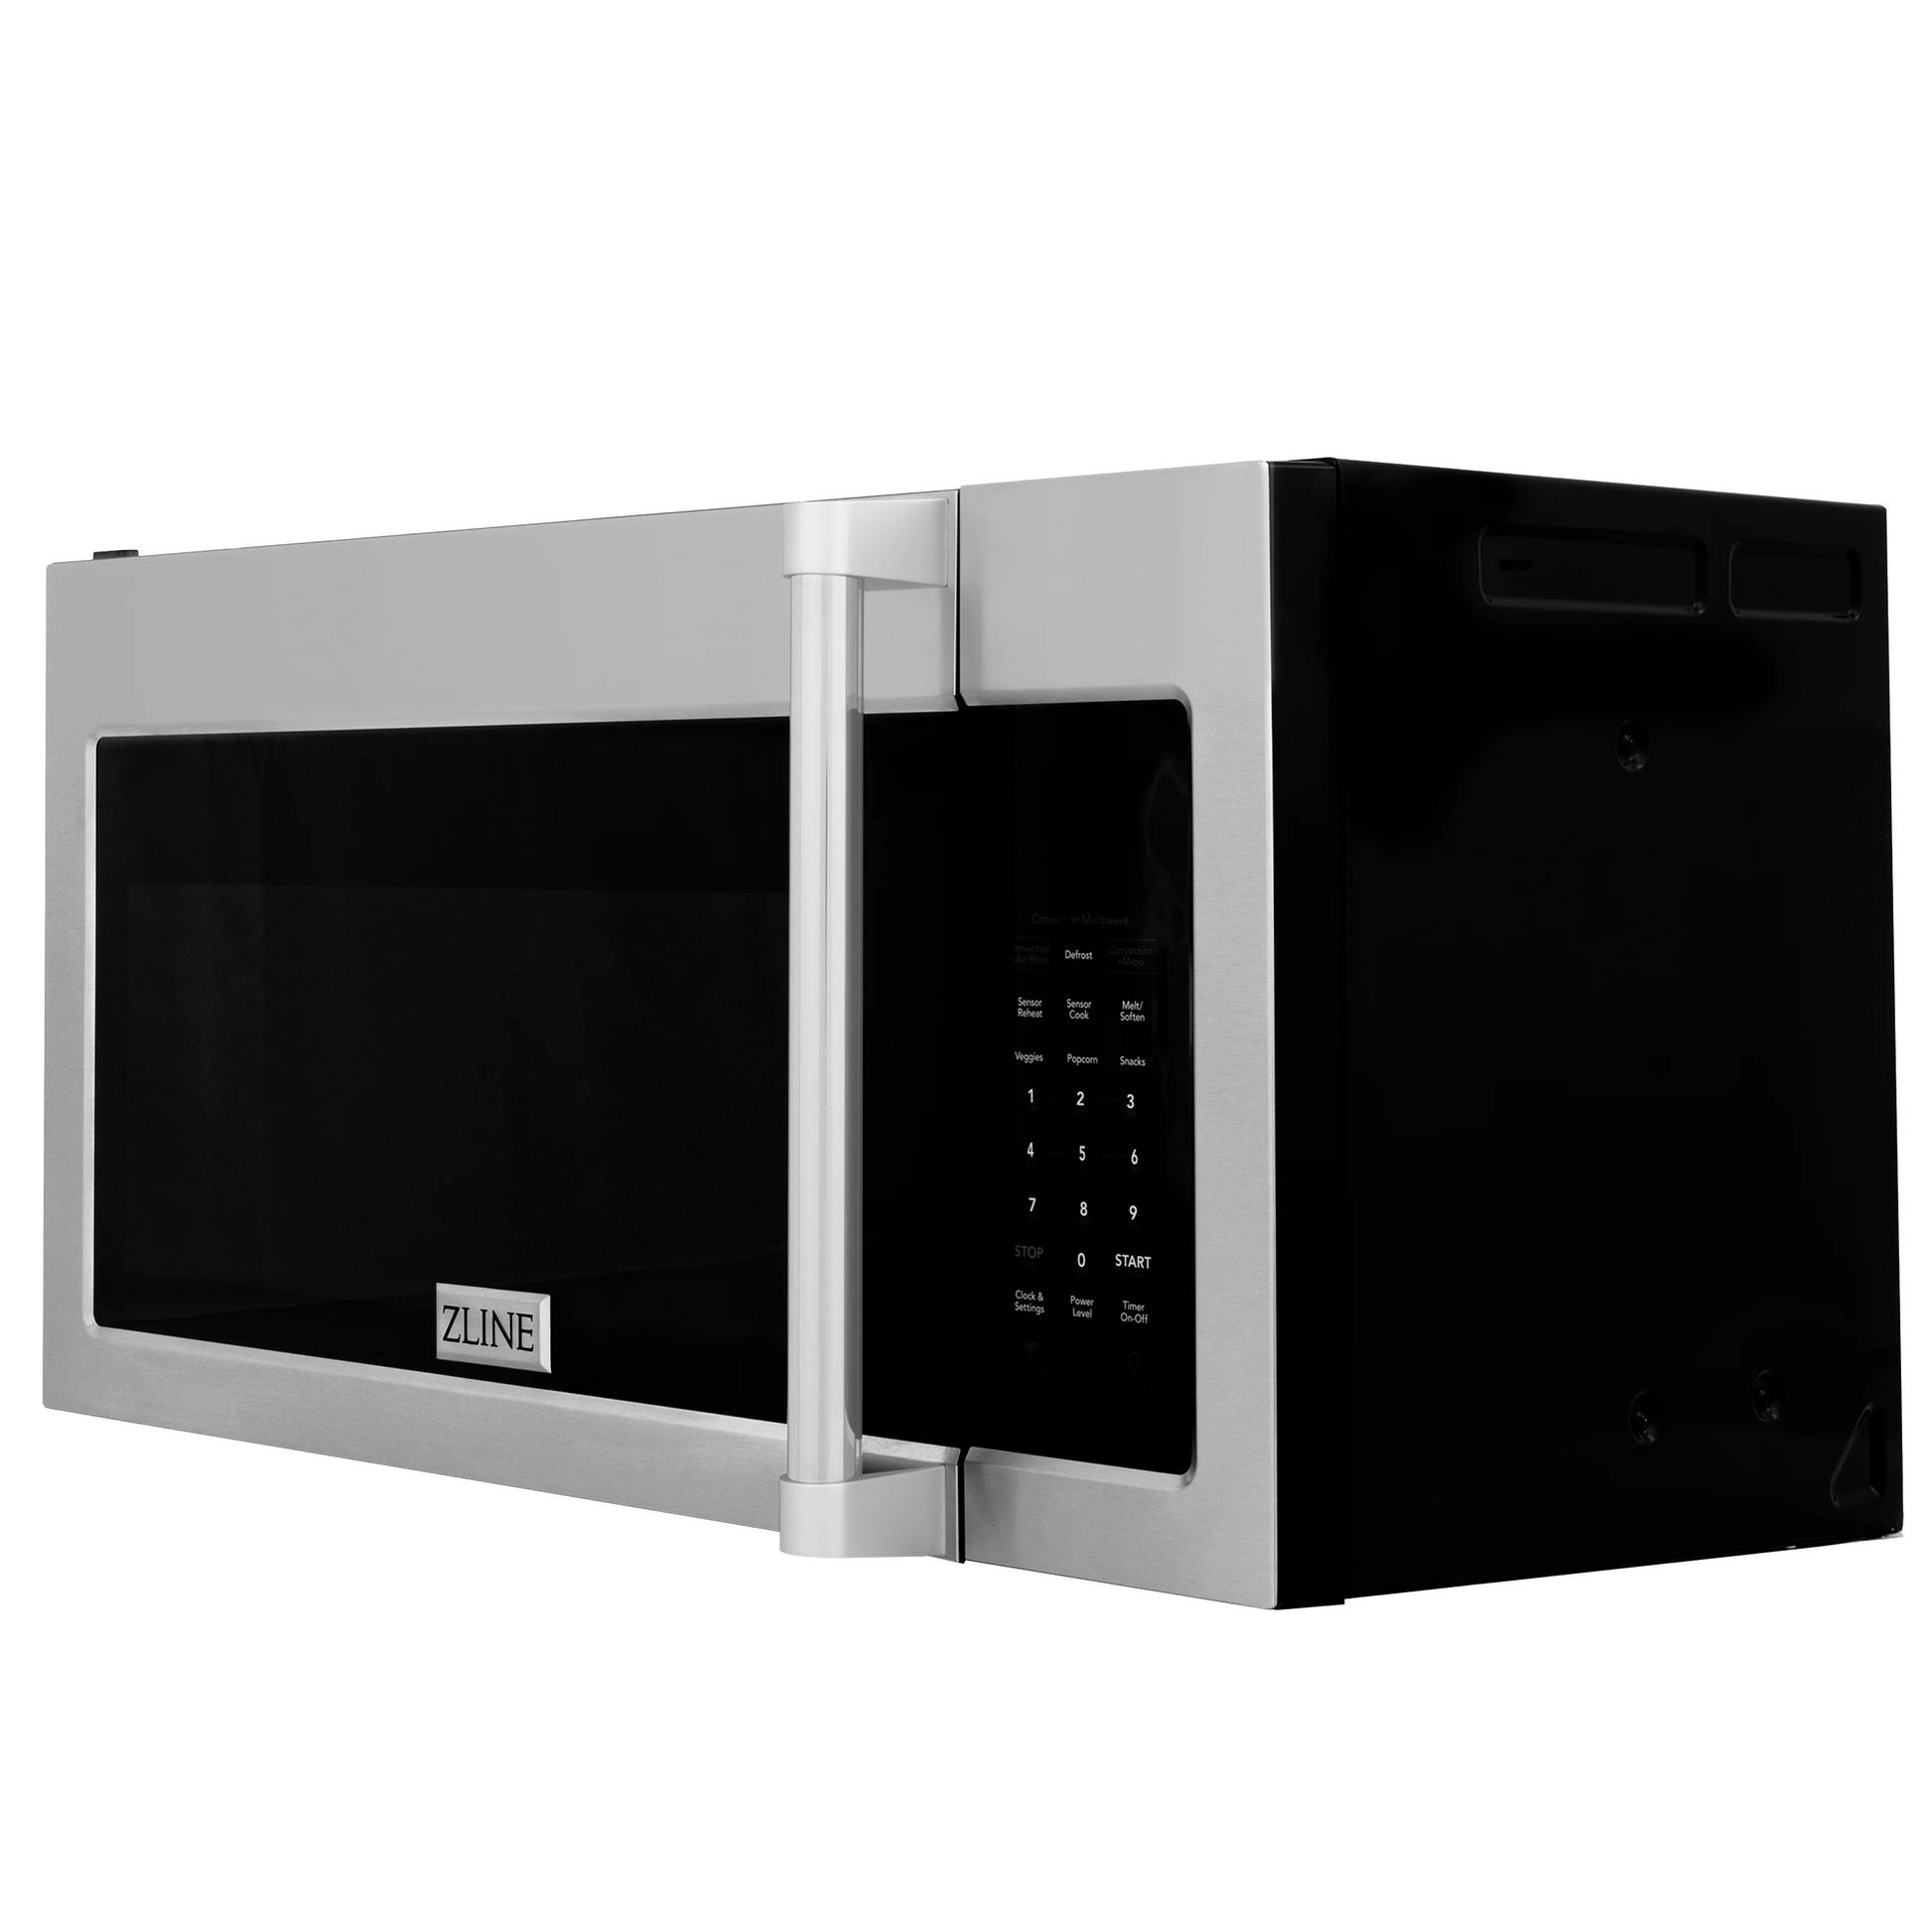 https://kitchenoasis.com/cdn/shop/files/ZLINE-1_5-cu_-ft_-Over-the-Range-Convection-Microwave-Oven-in-Stainless-Steel-With-Traditional-Handle-and-Sensor-Cooking-2.png?v=1687568105&width=1946